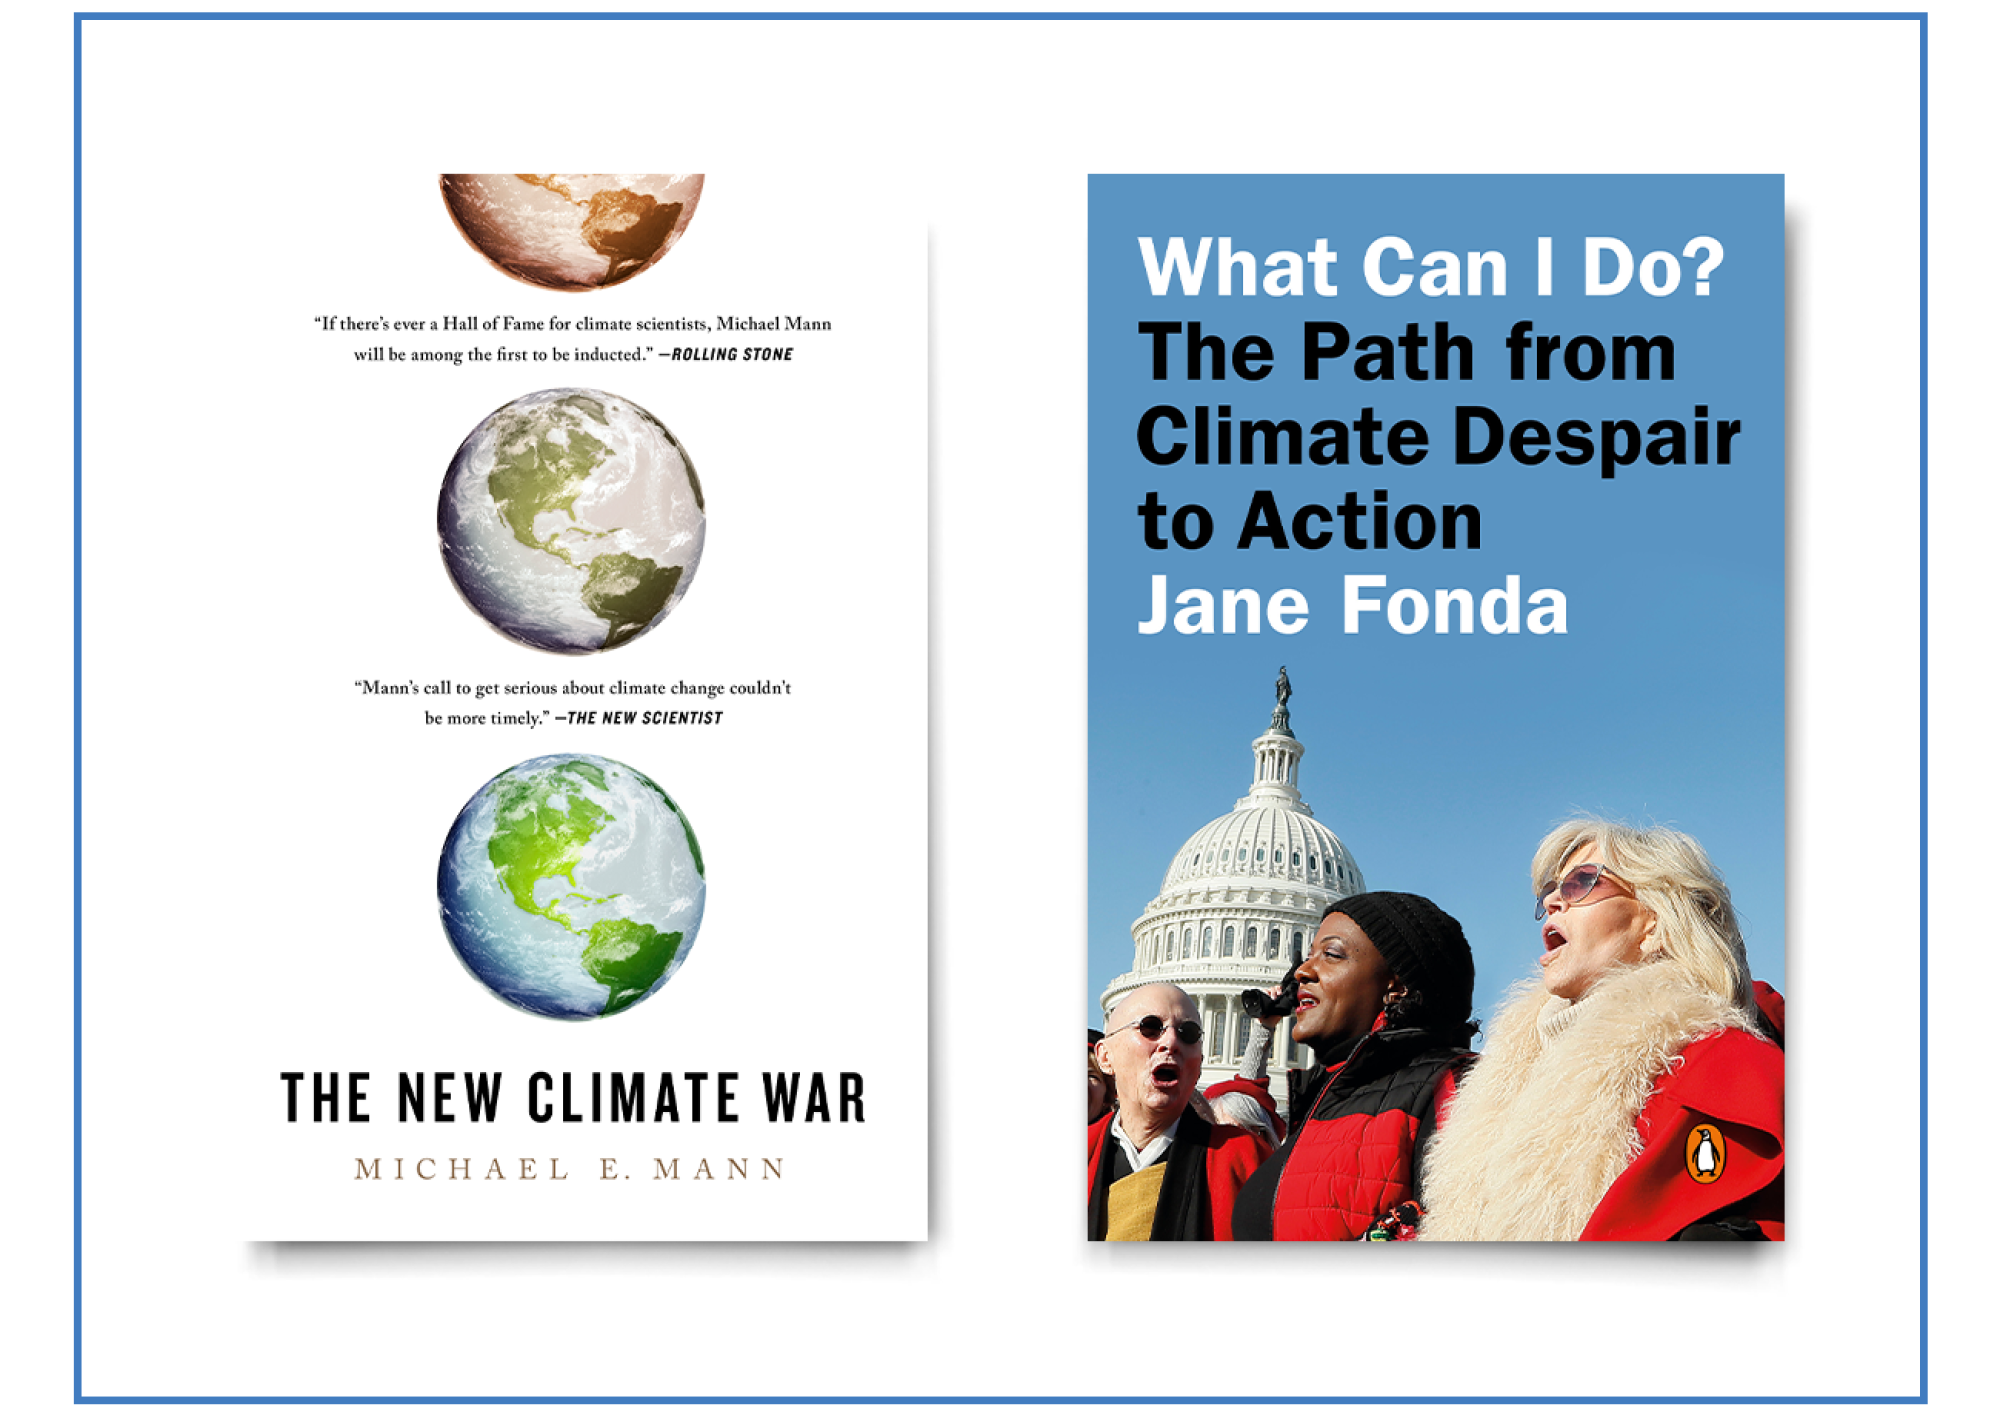 Let's Talk 'Climate' Books - The New York Times